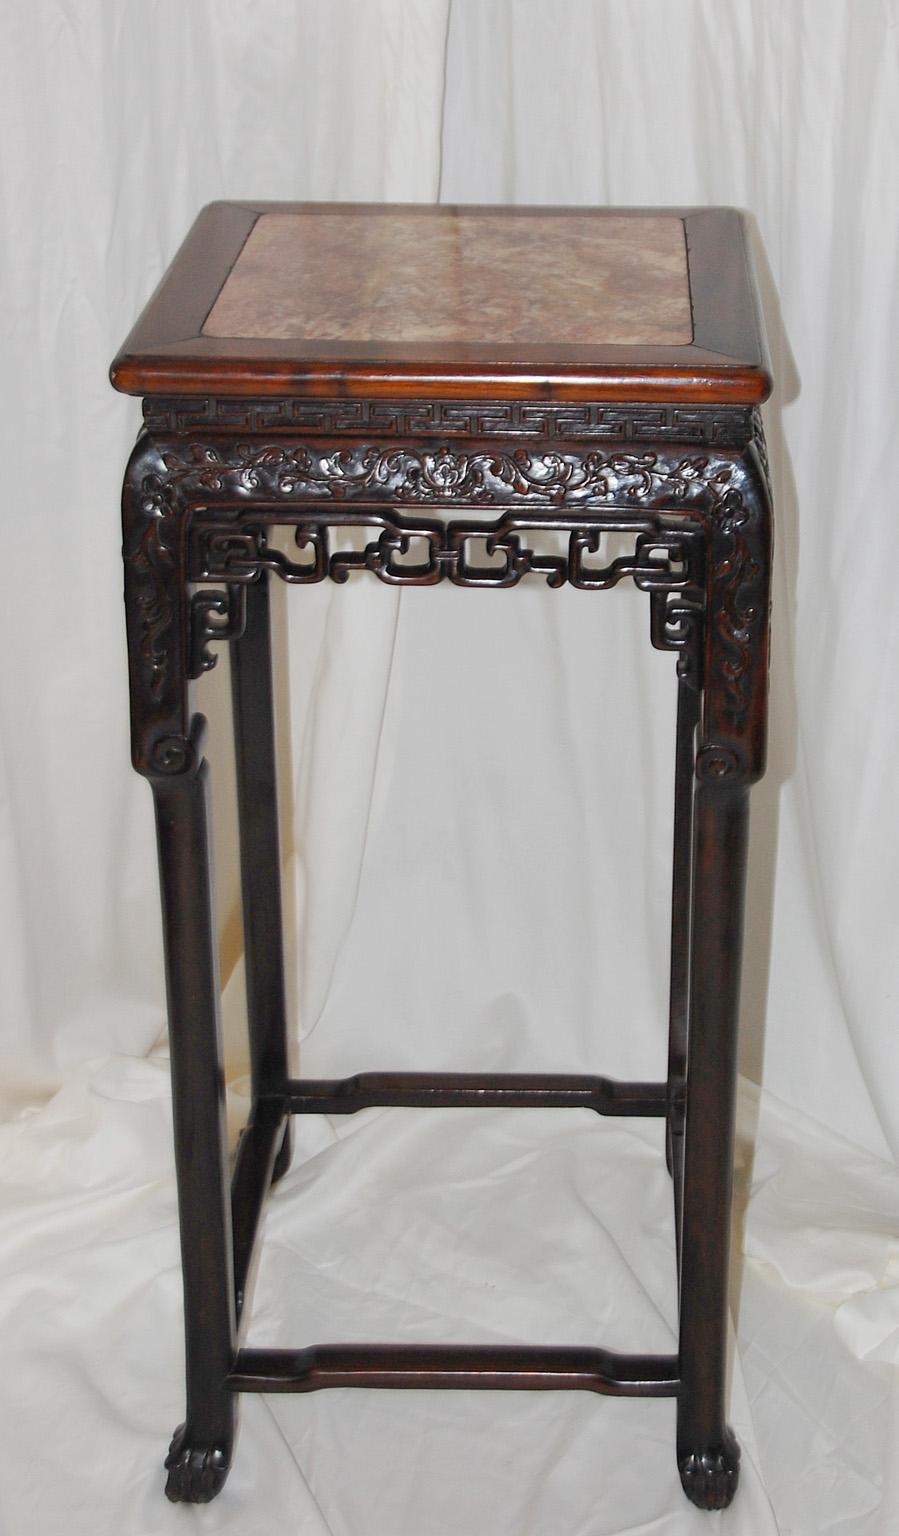 Chinese Qing dynasty 19th century carved hardwood stand with rose marble inset to the top. This subtly carved 35 1/2 inch tall stand makes an excellent display pedestal for all kinds of special objects, or planters, or elegant flower arrangements or